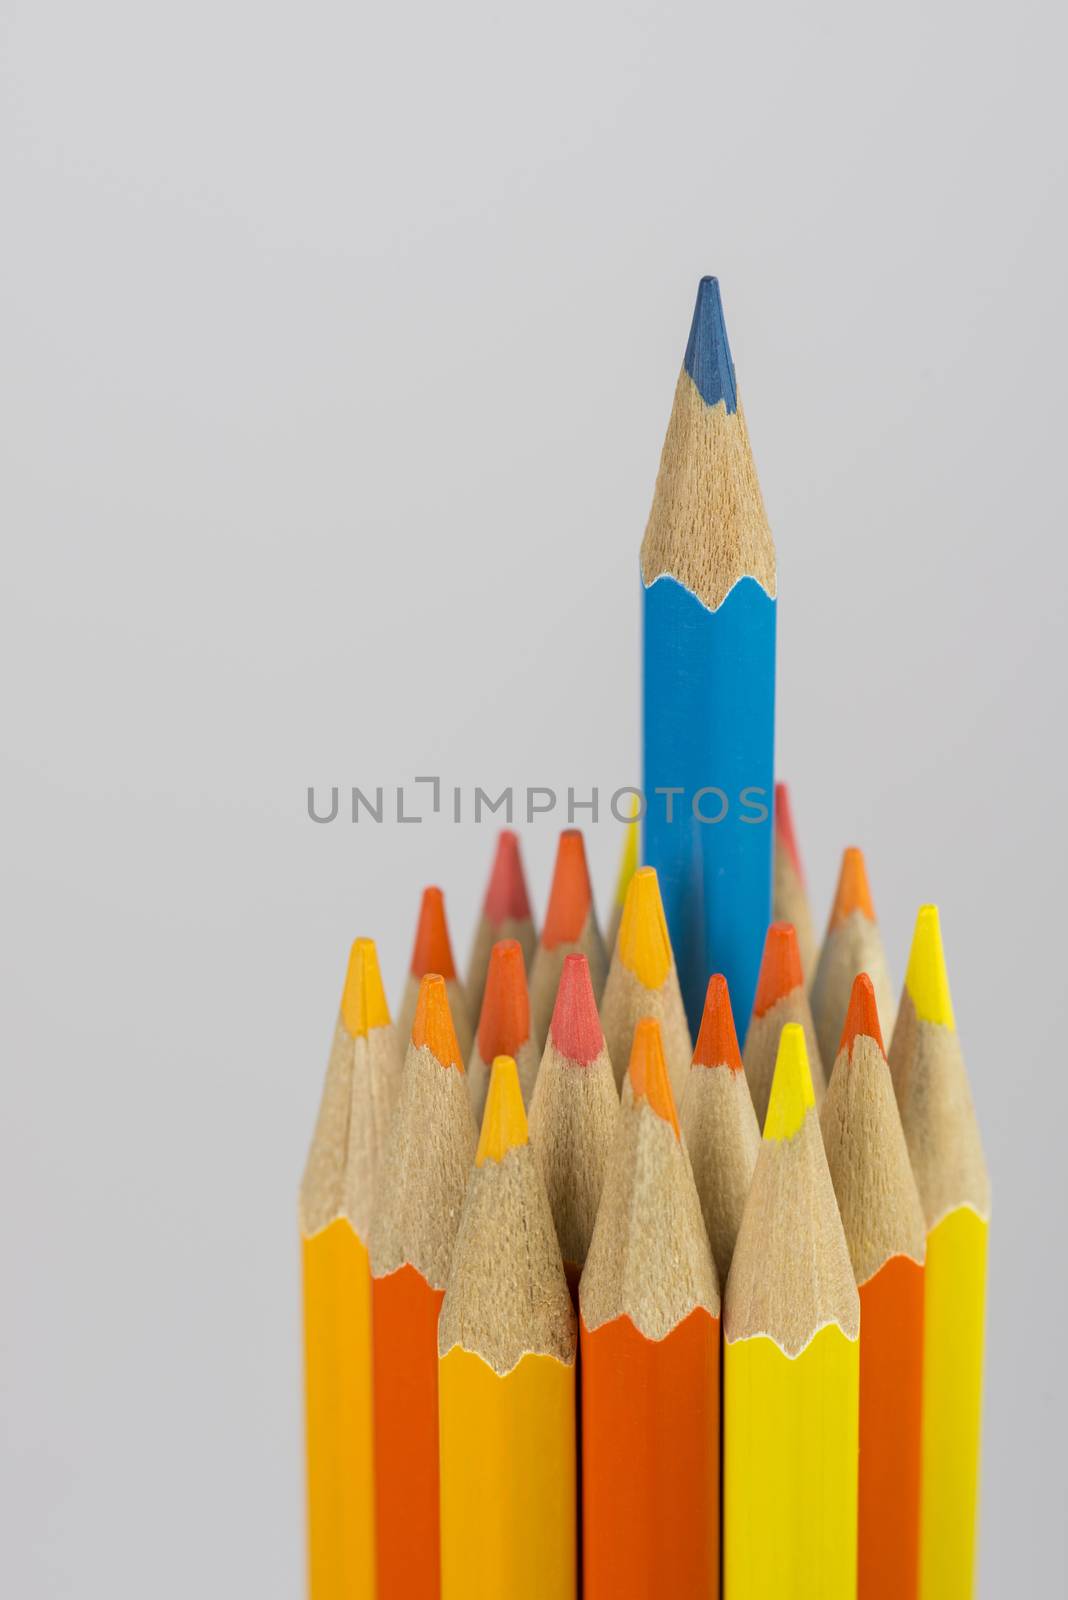 collection of colored wooden pencils
 by Tofotografie